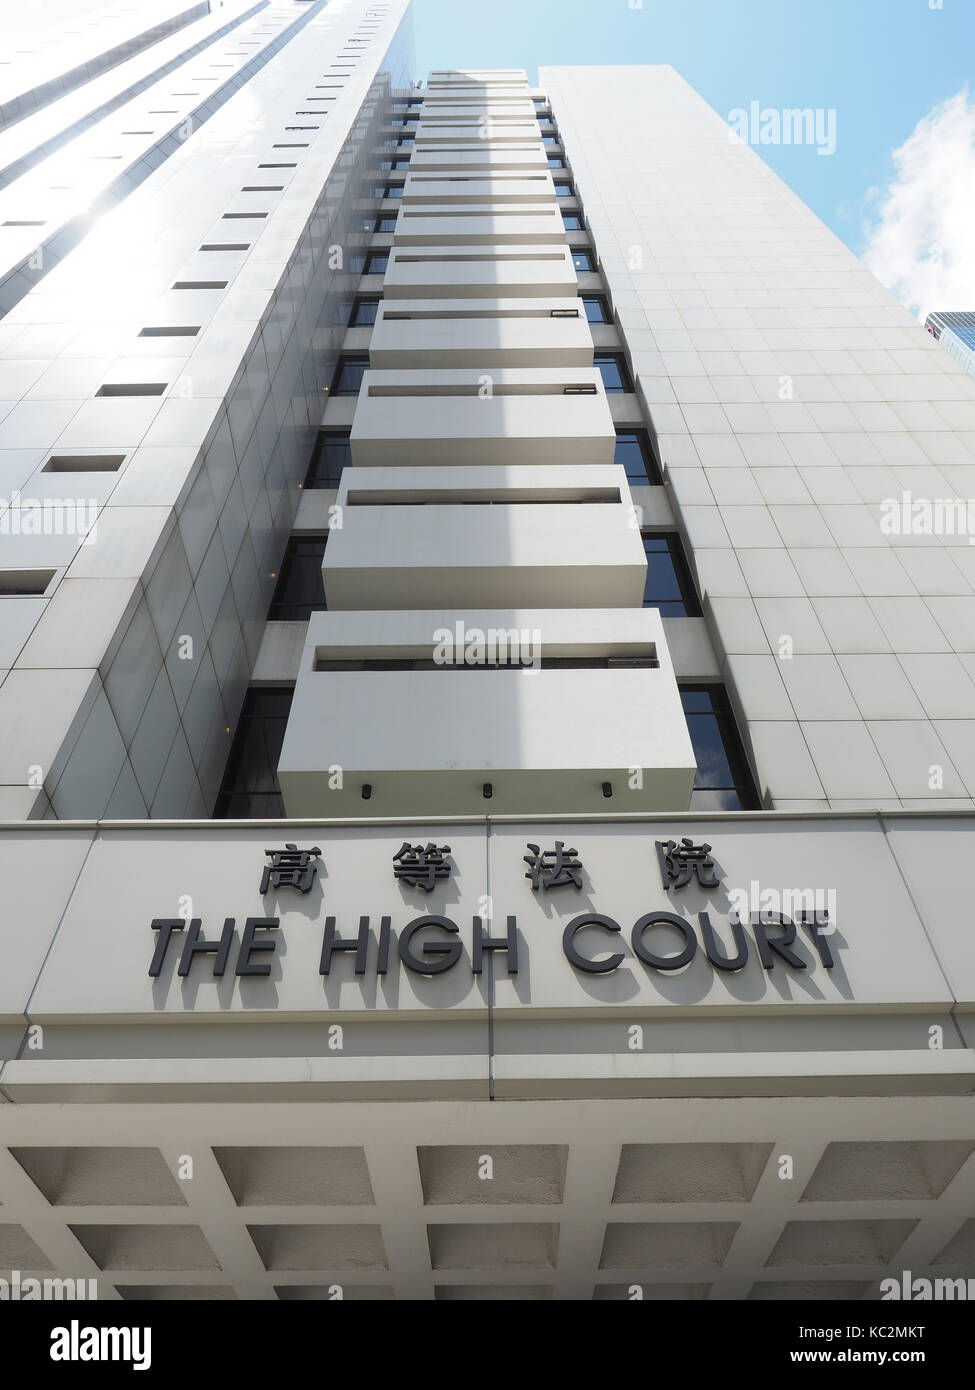 Front view looking up at The High Court building in Hong Kong Stock Photo